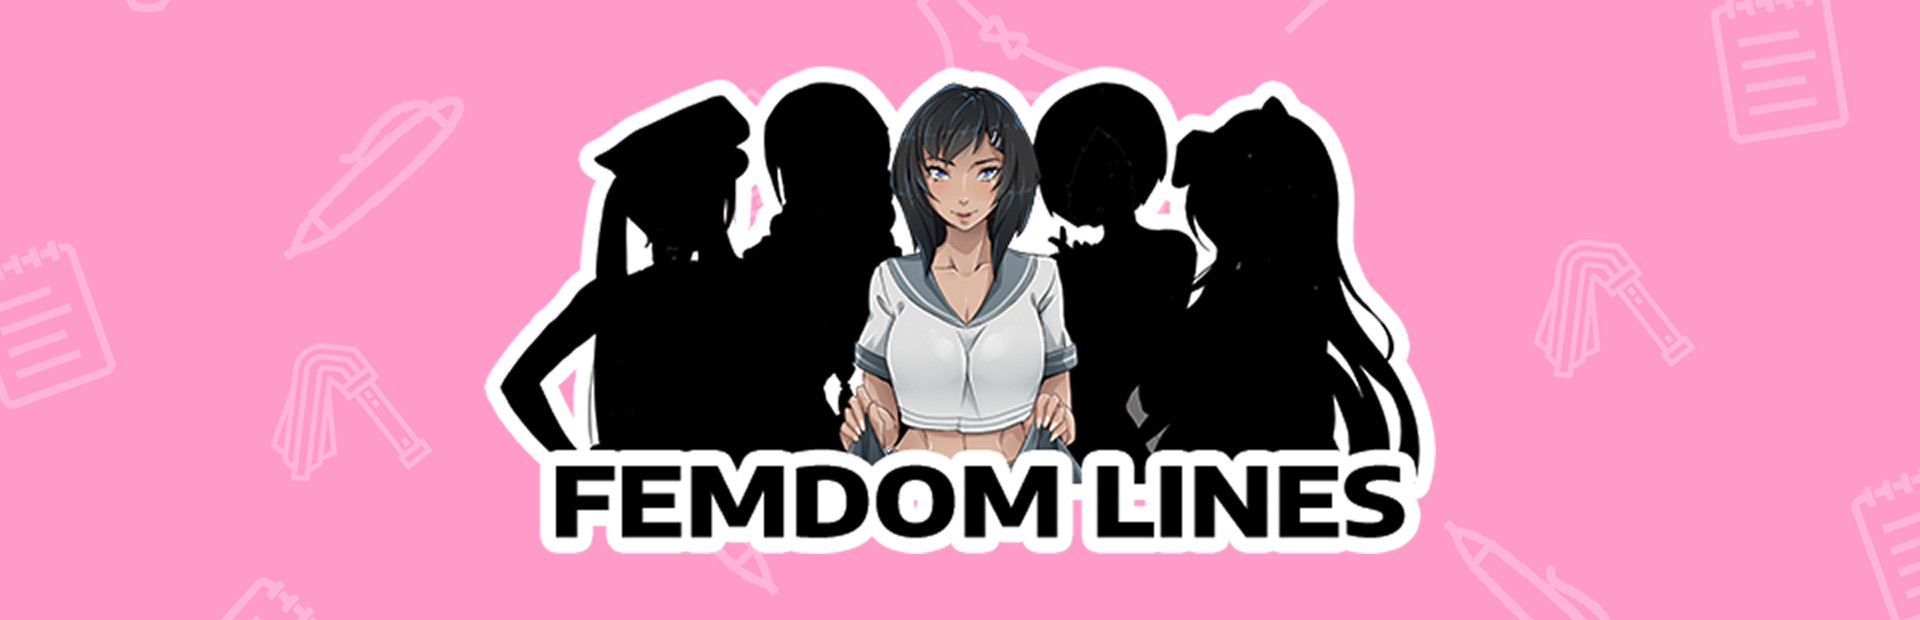 Femdom Lines cover image